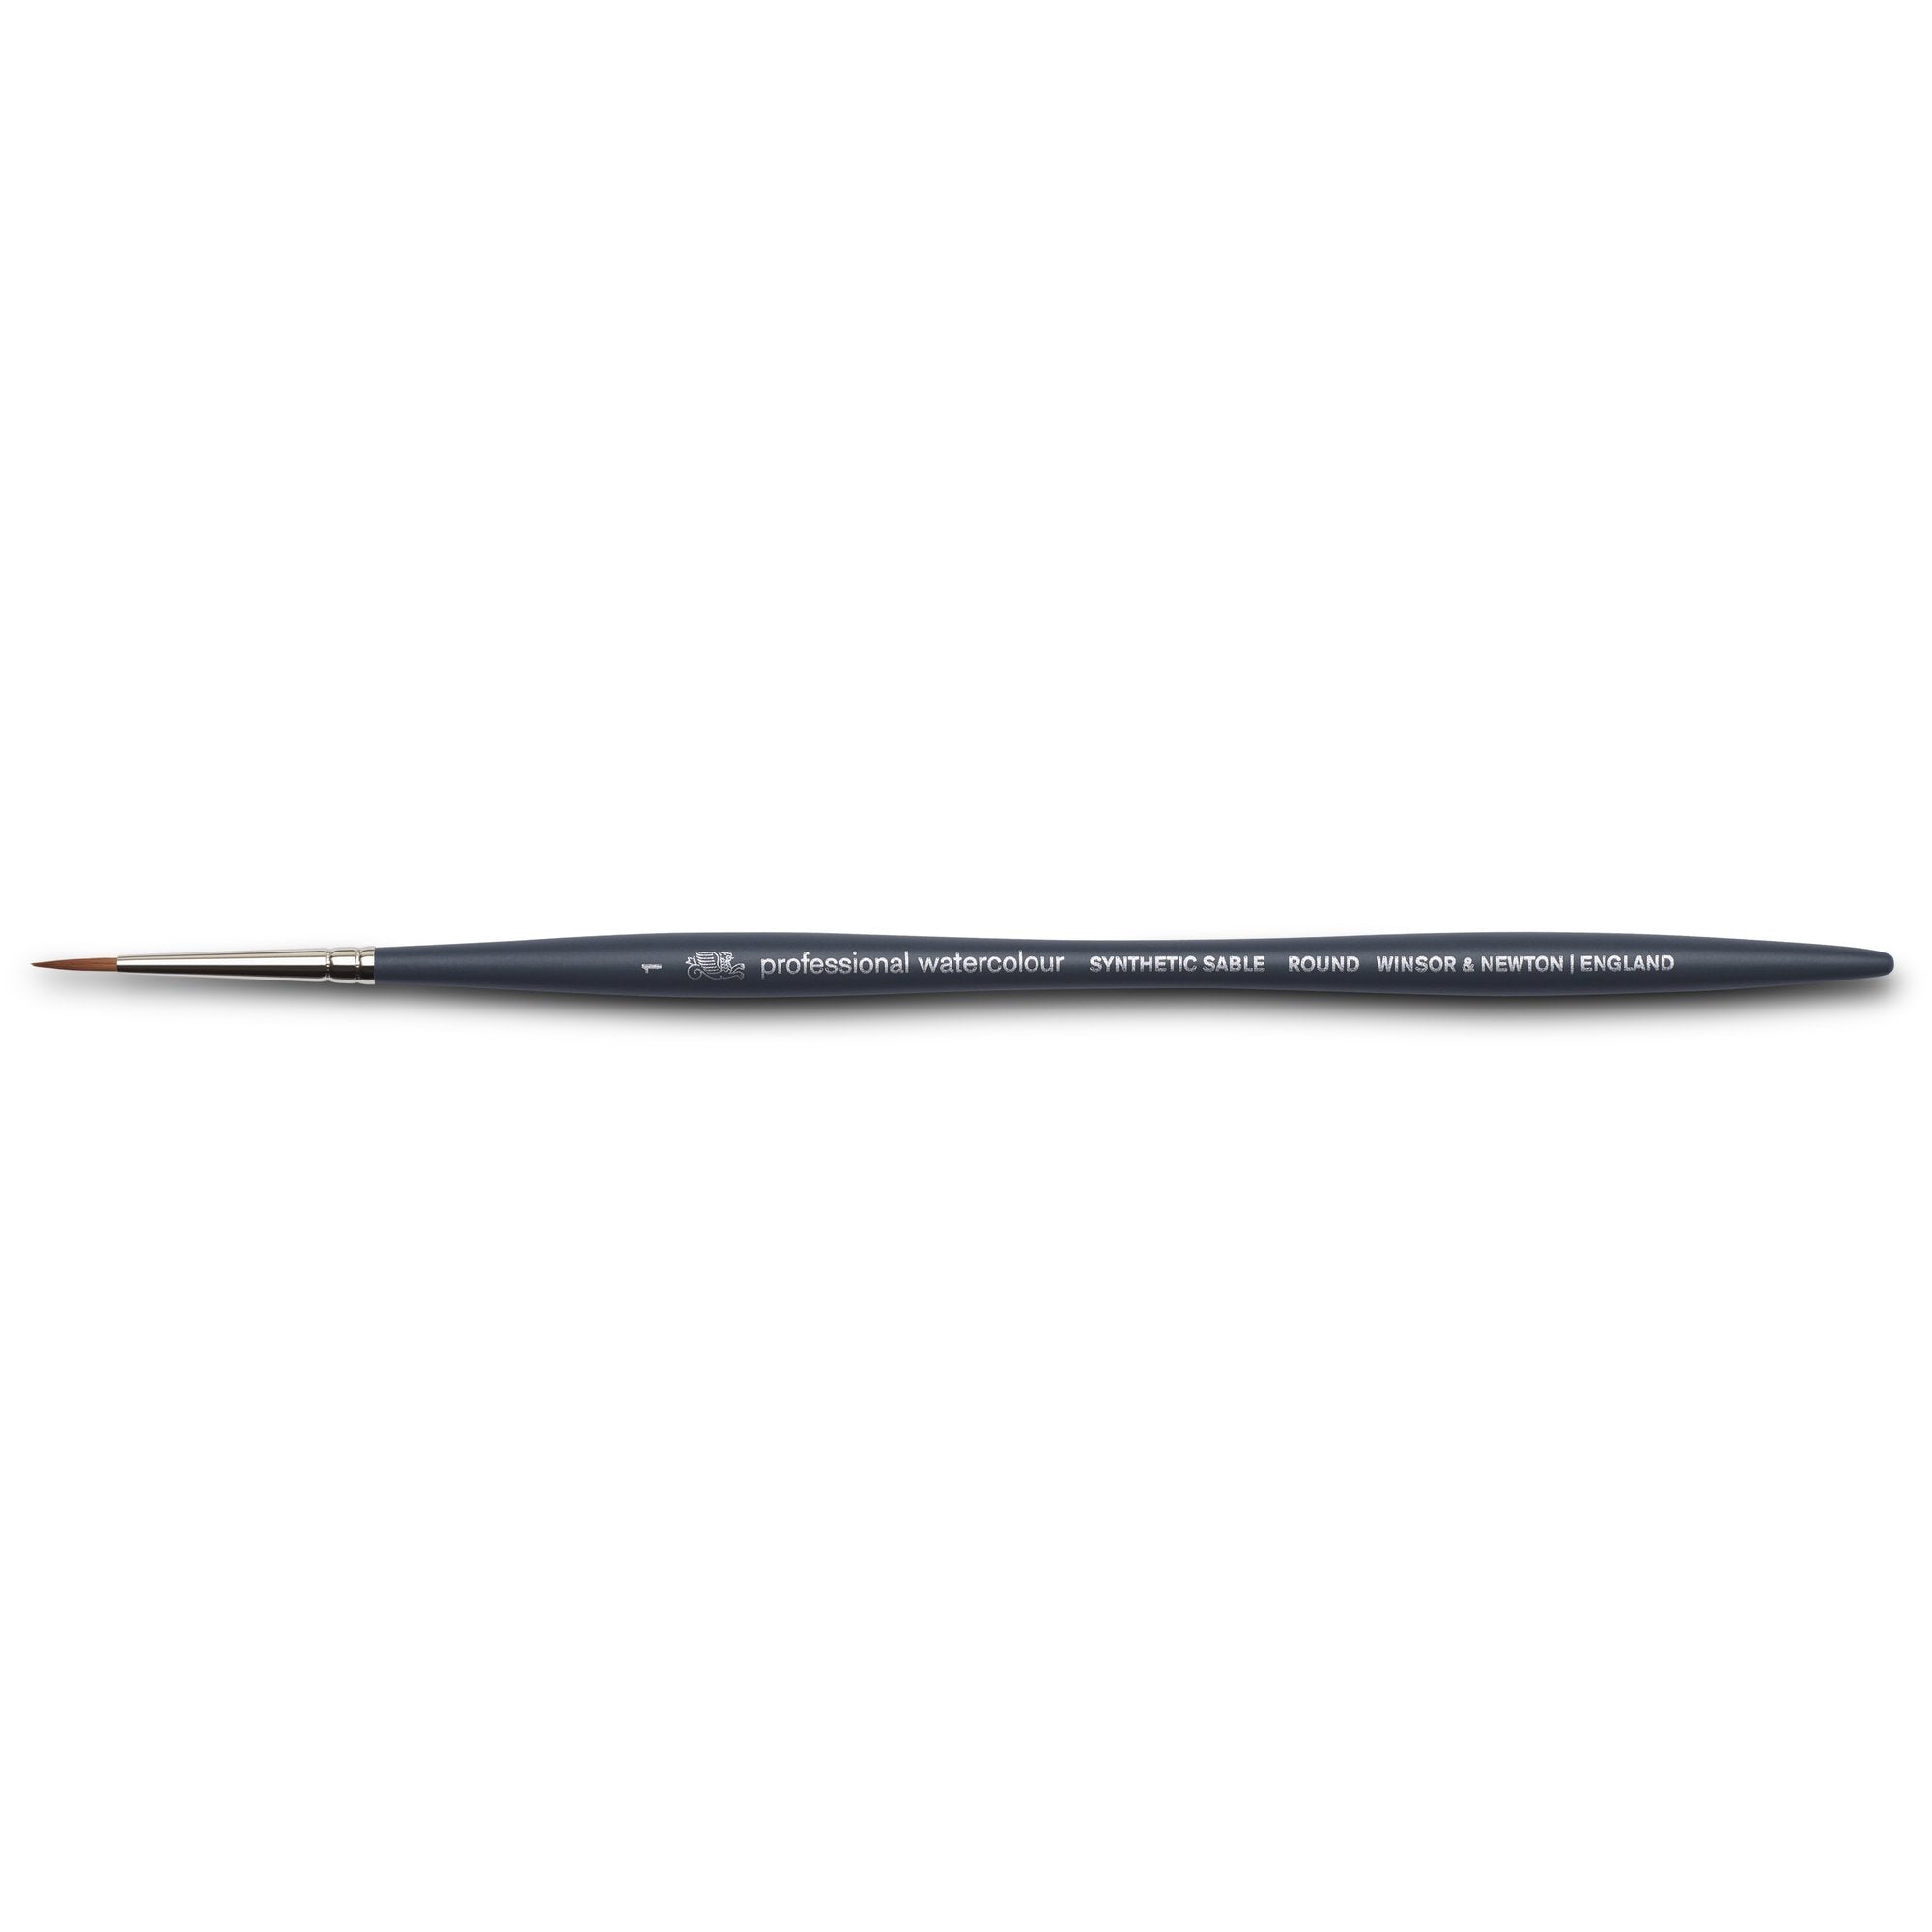 5011101Winsor & Newton have created a new line professional synthetic sable brushes, made using the finest materials to rival natural sable. 